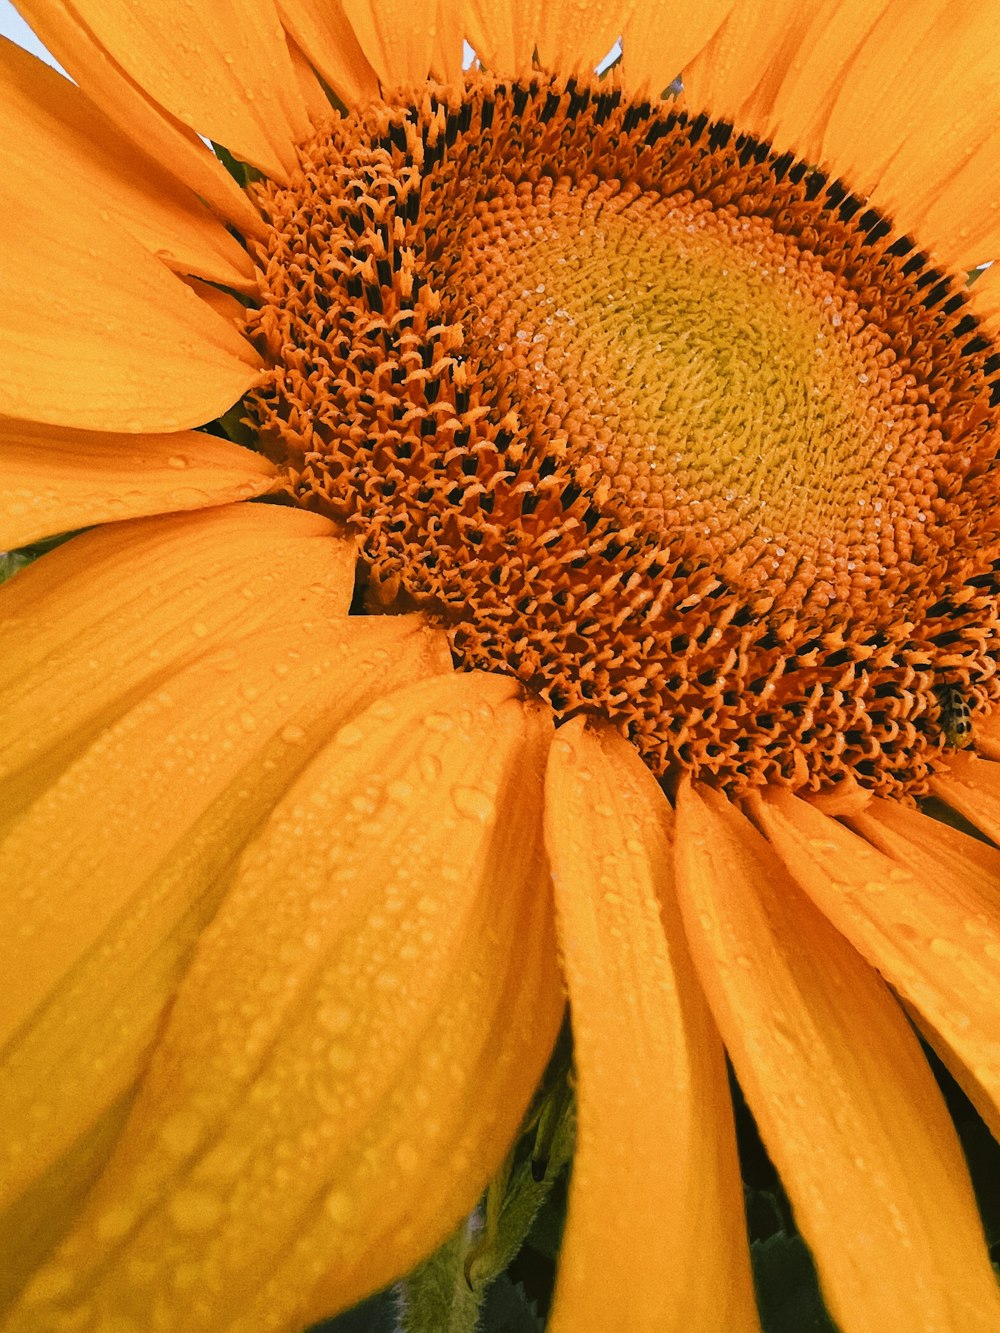 a close up of a sunflower with water droplets on it